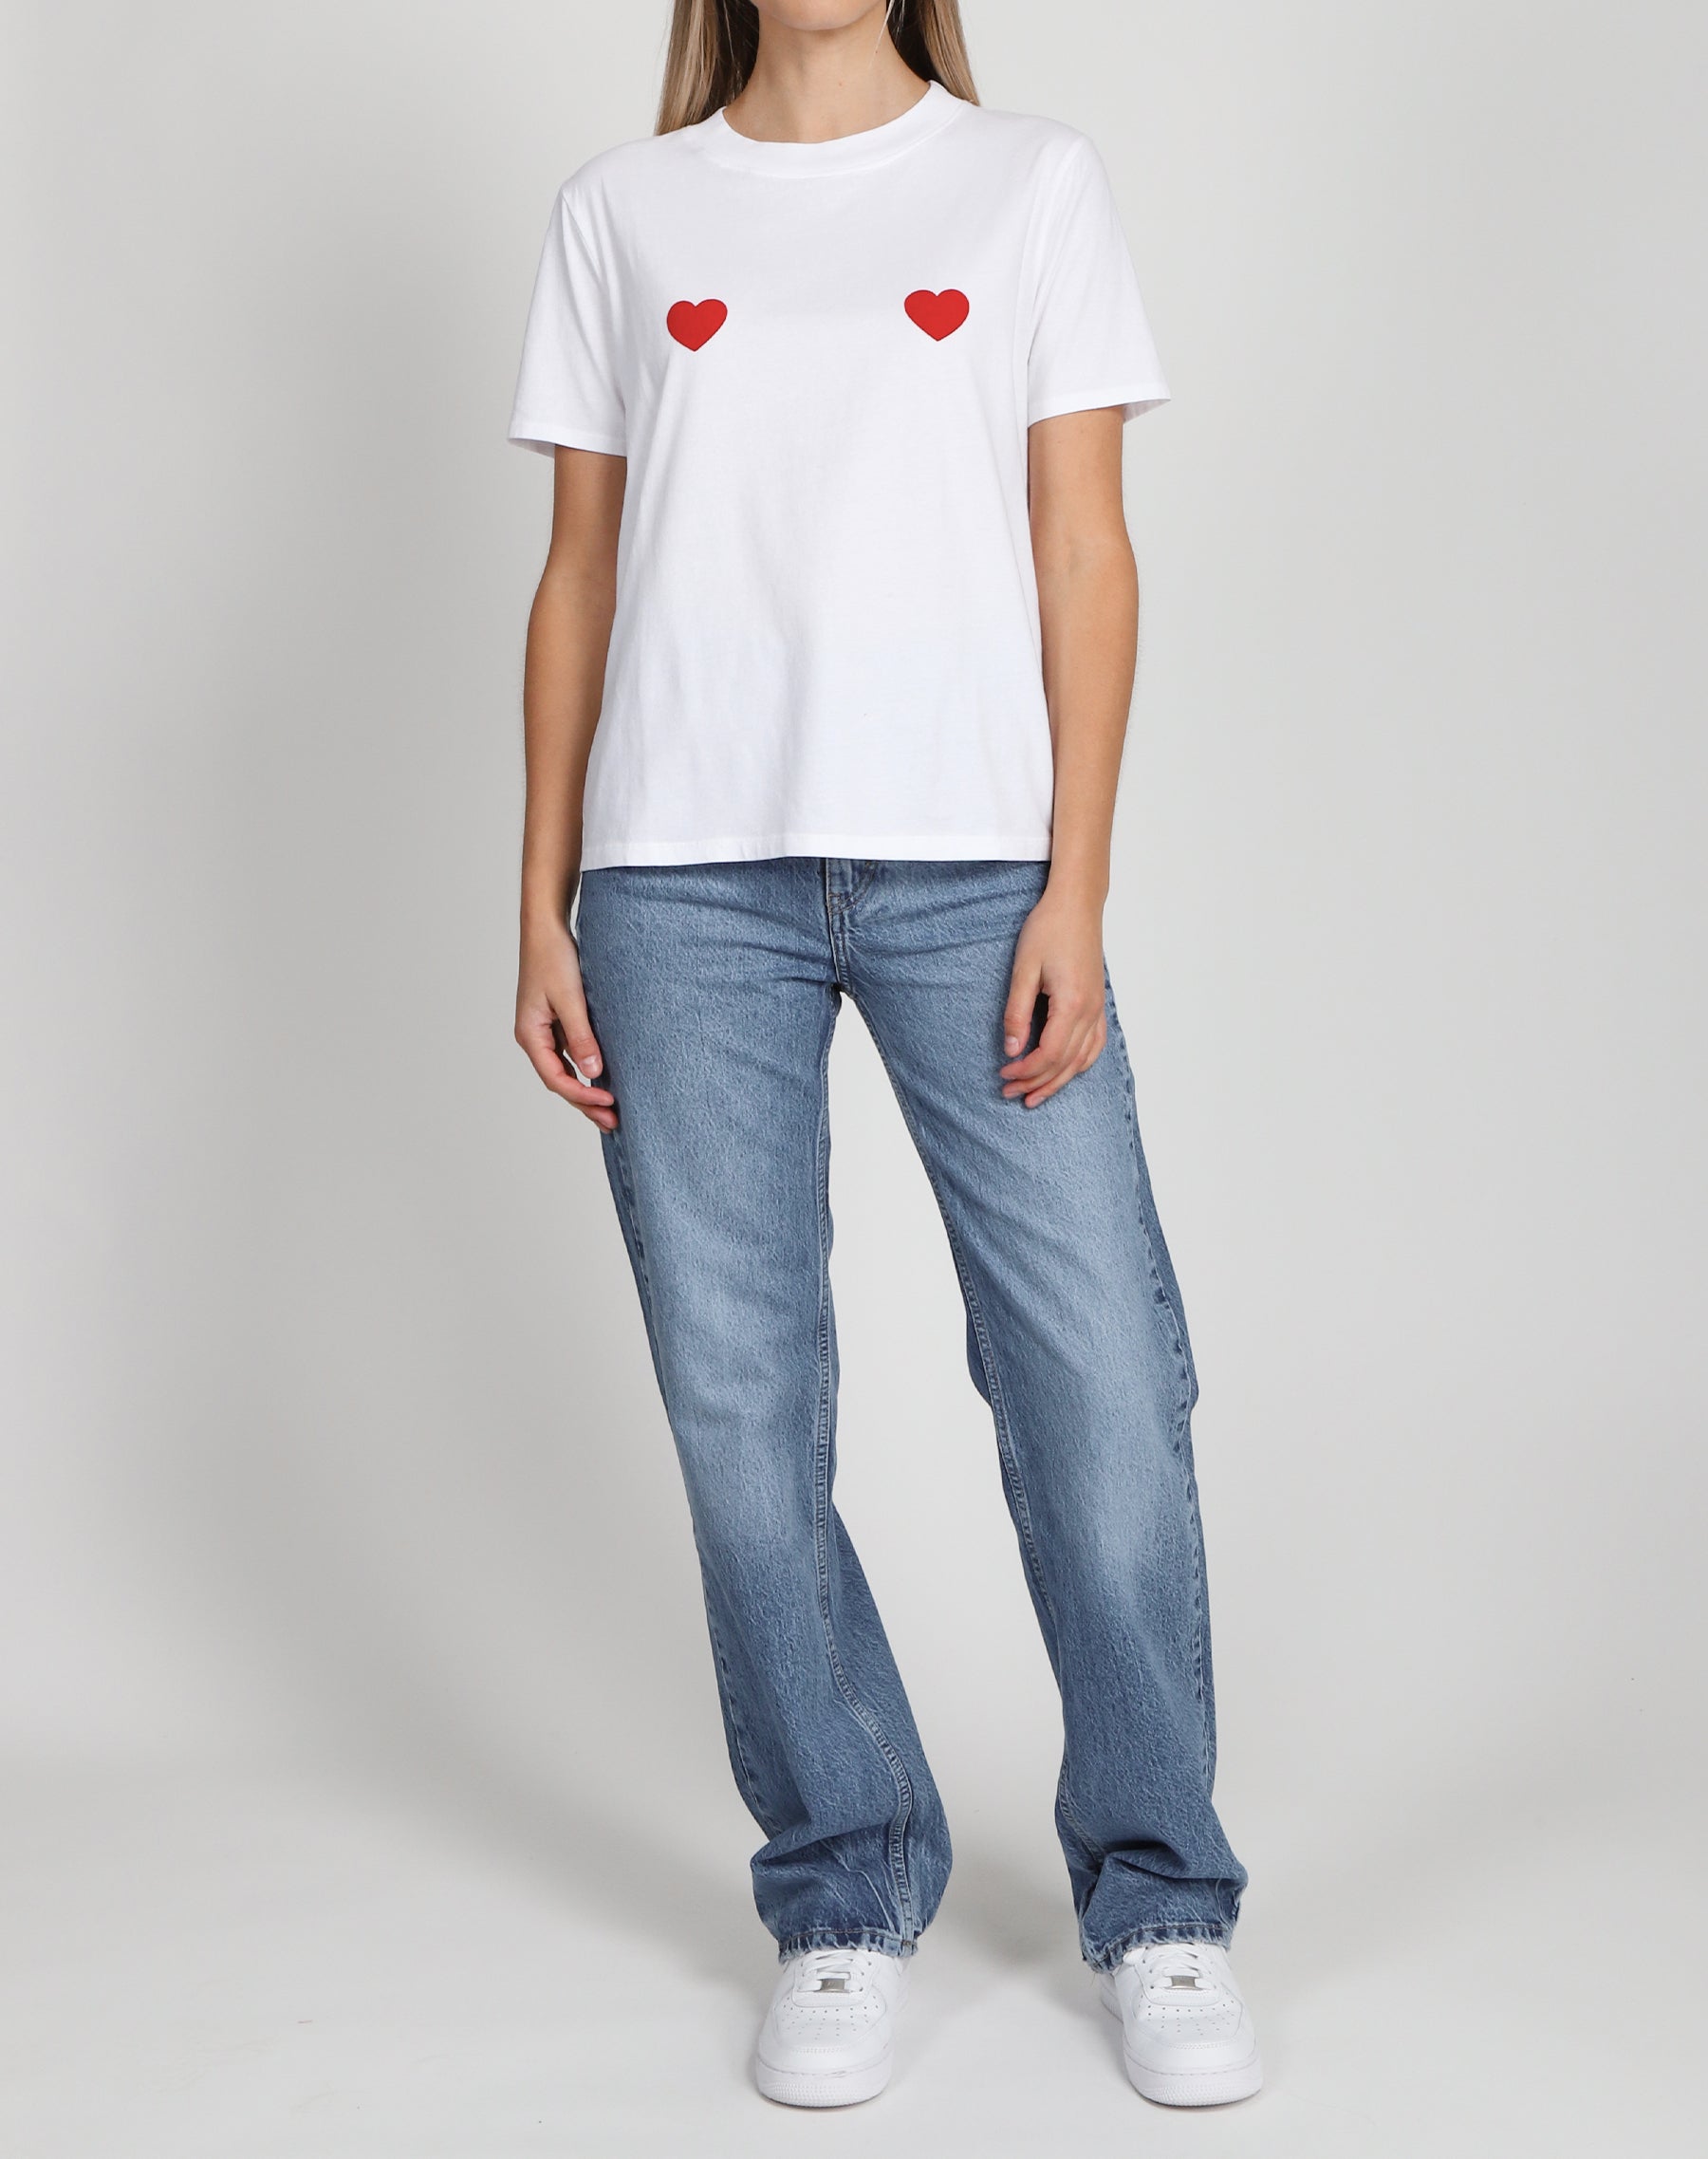 The "DOUBLE HEART" Classic Tee | White with Hot Pink